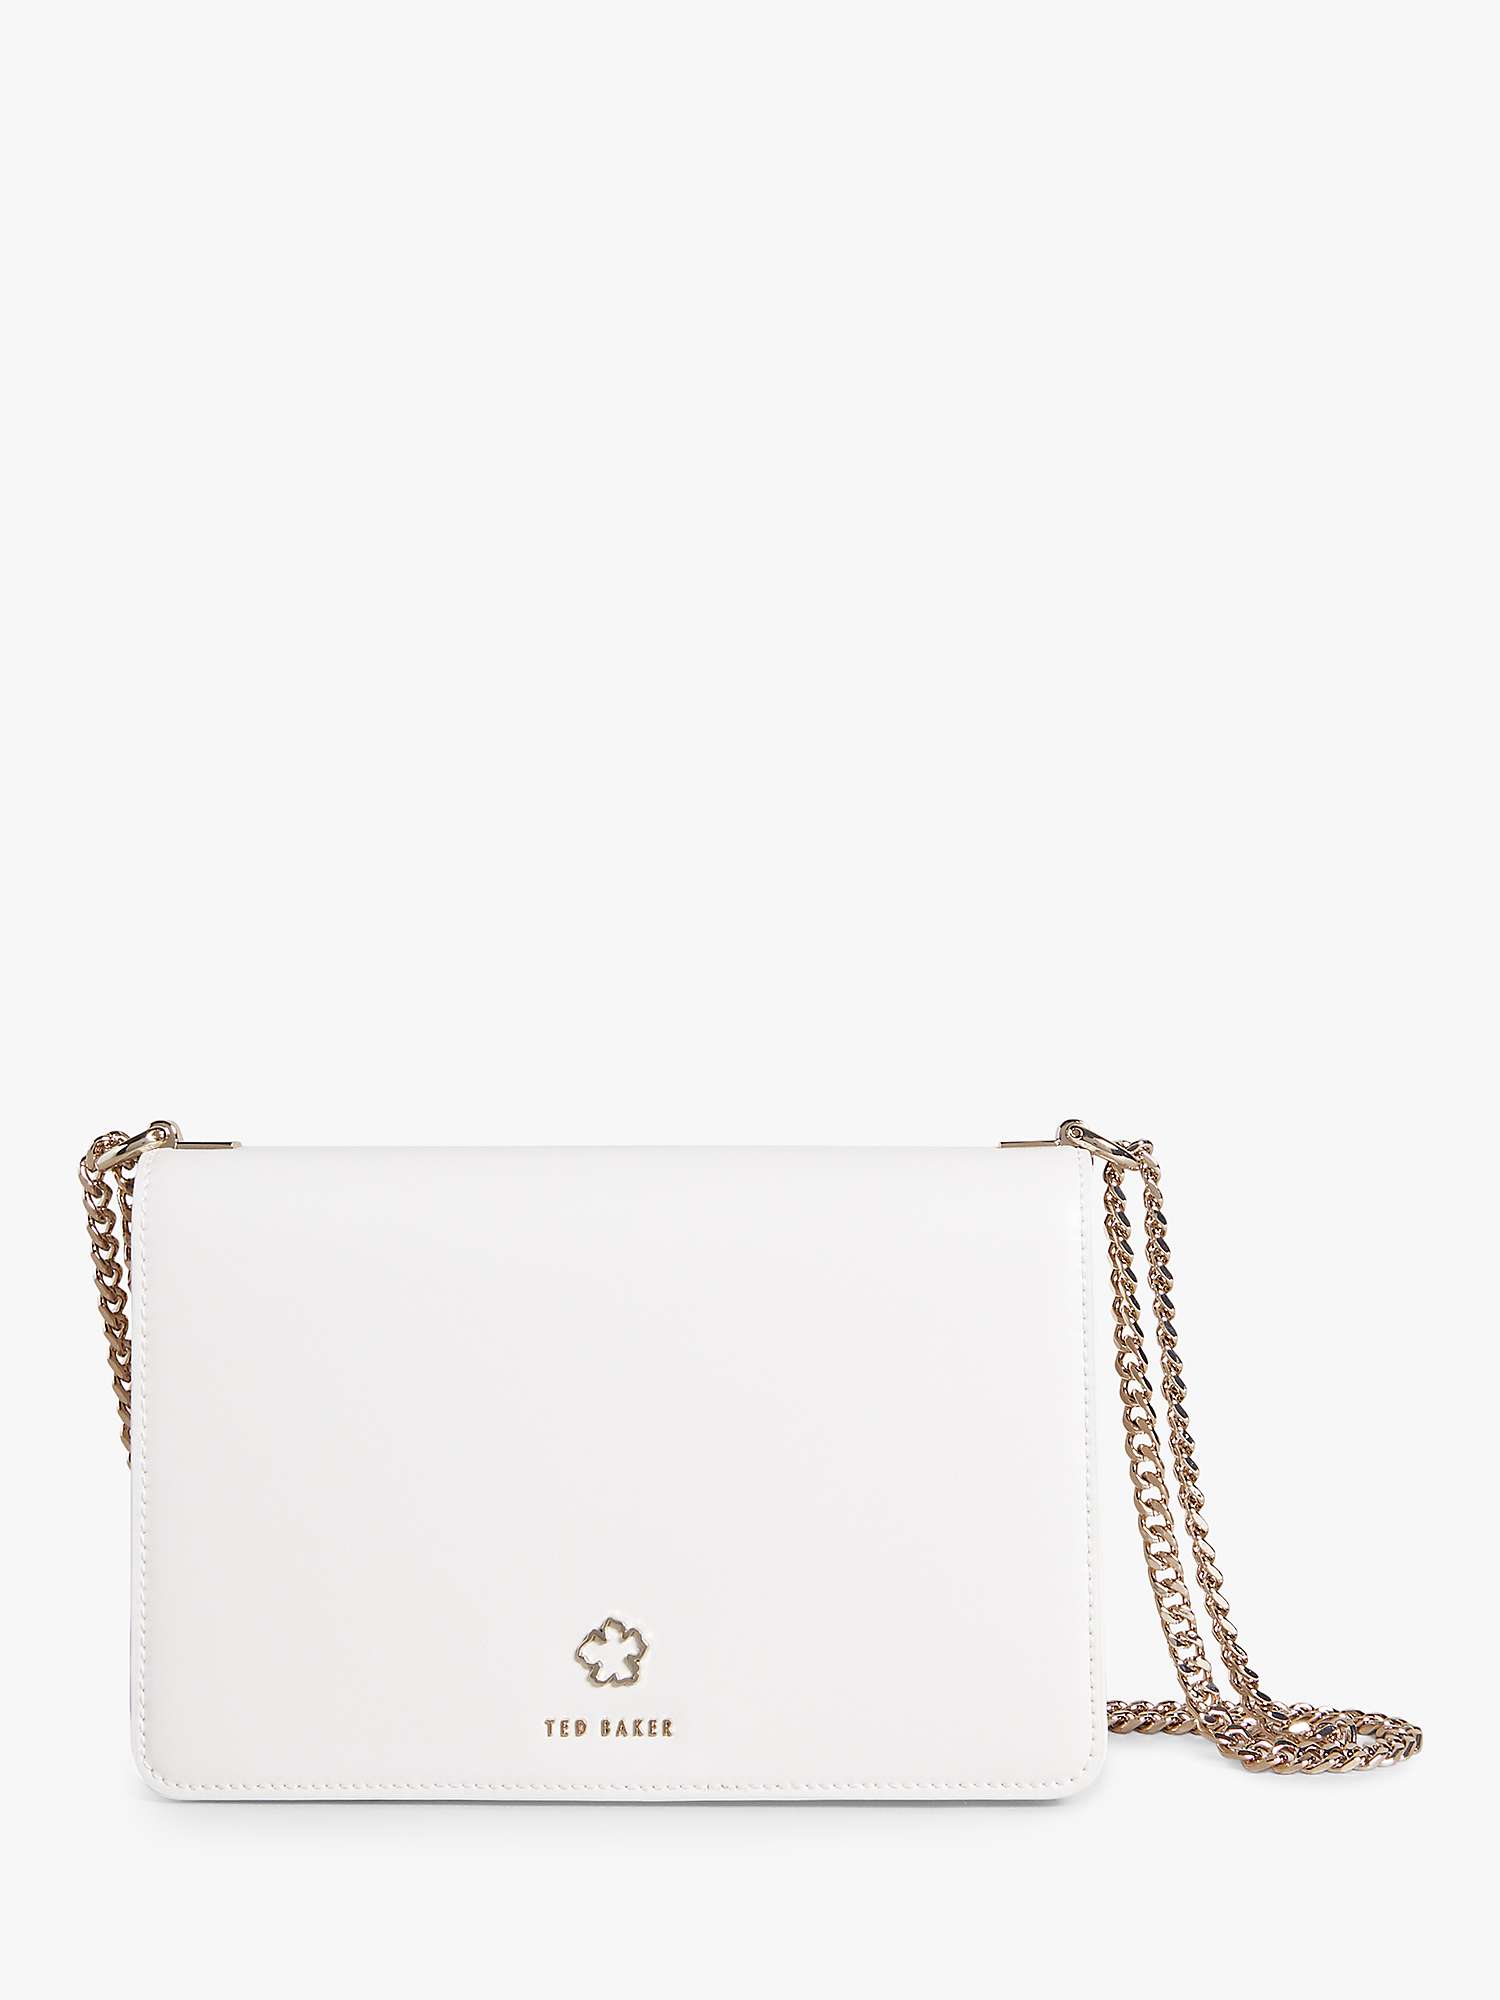 Buy Ted Baker Jorjey Leather Chain Strap Cross Body Bag Online at johnlewis.com